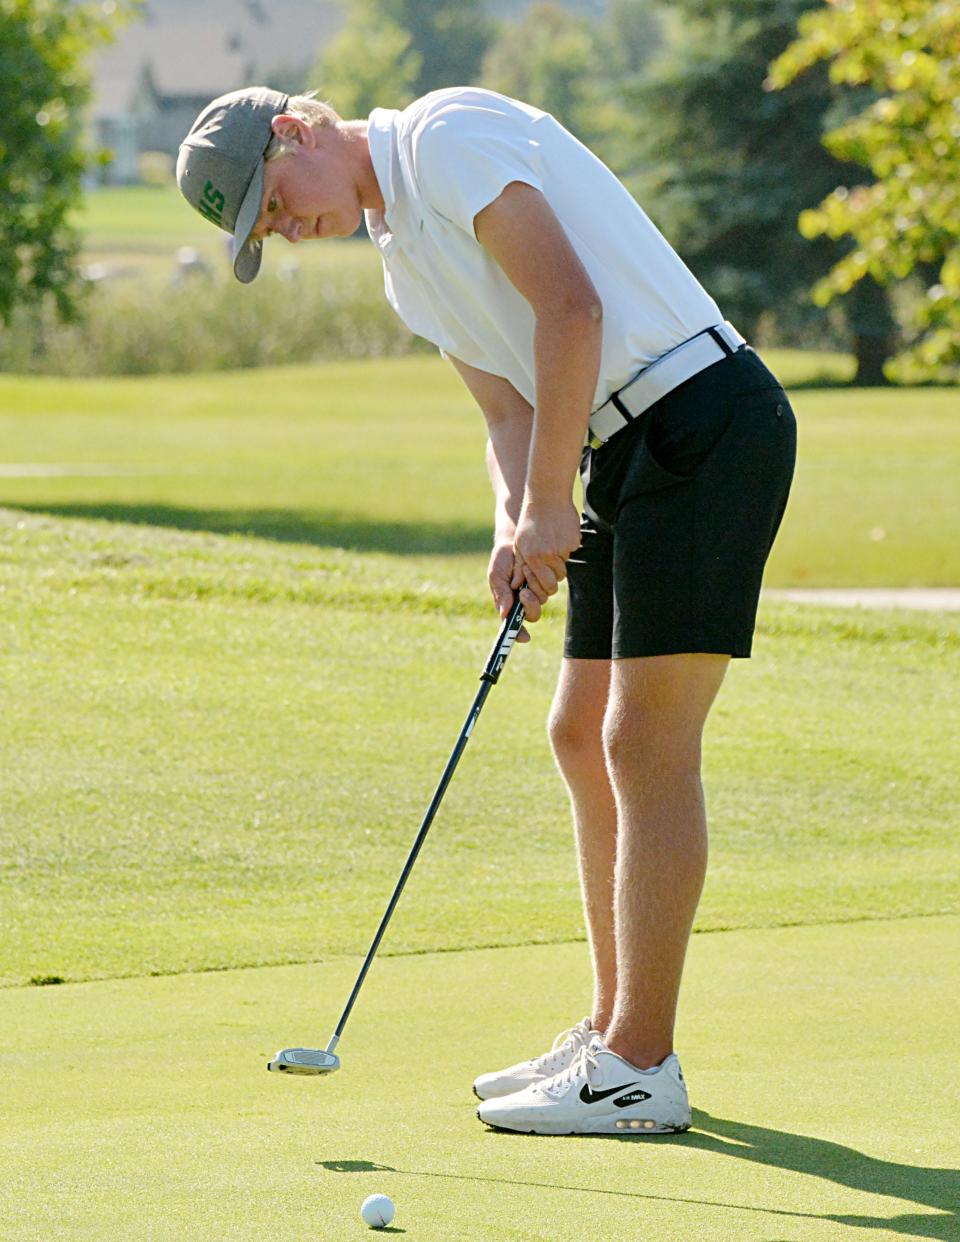 Aberdeen Roncalli's Sawyer Henrich putts on No. 4 Red during the Watertown Invitational boys golf tournament at Cattail Crossing Golf Course on Tuesday. Public Opinion by Roger Merriam